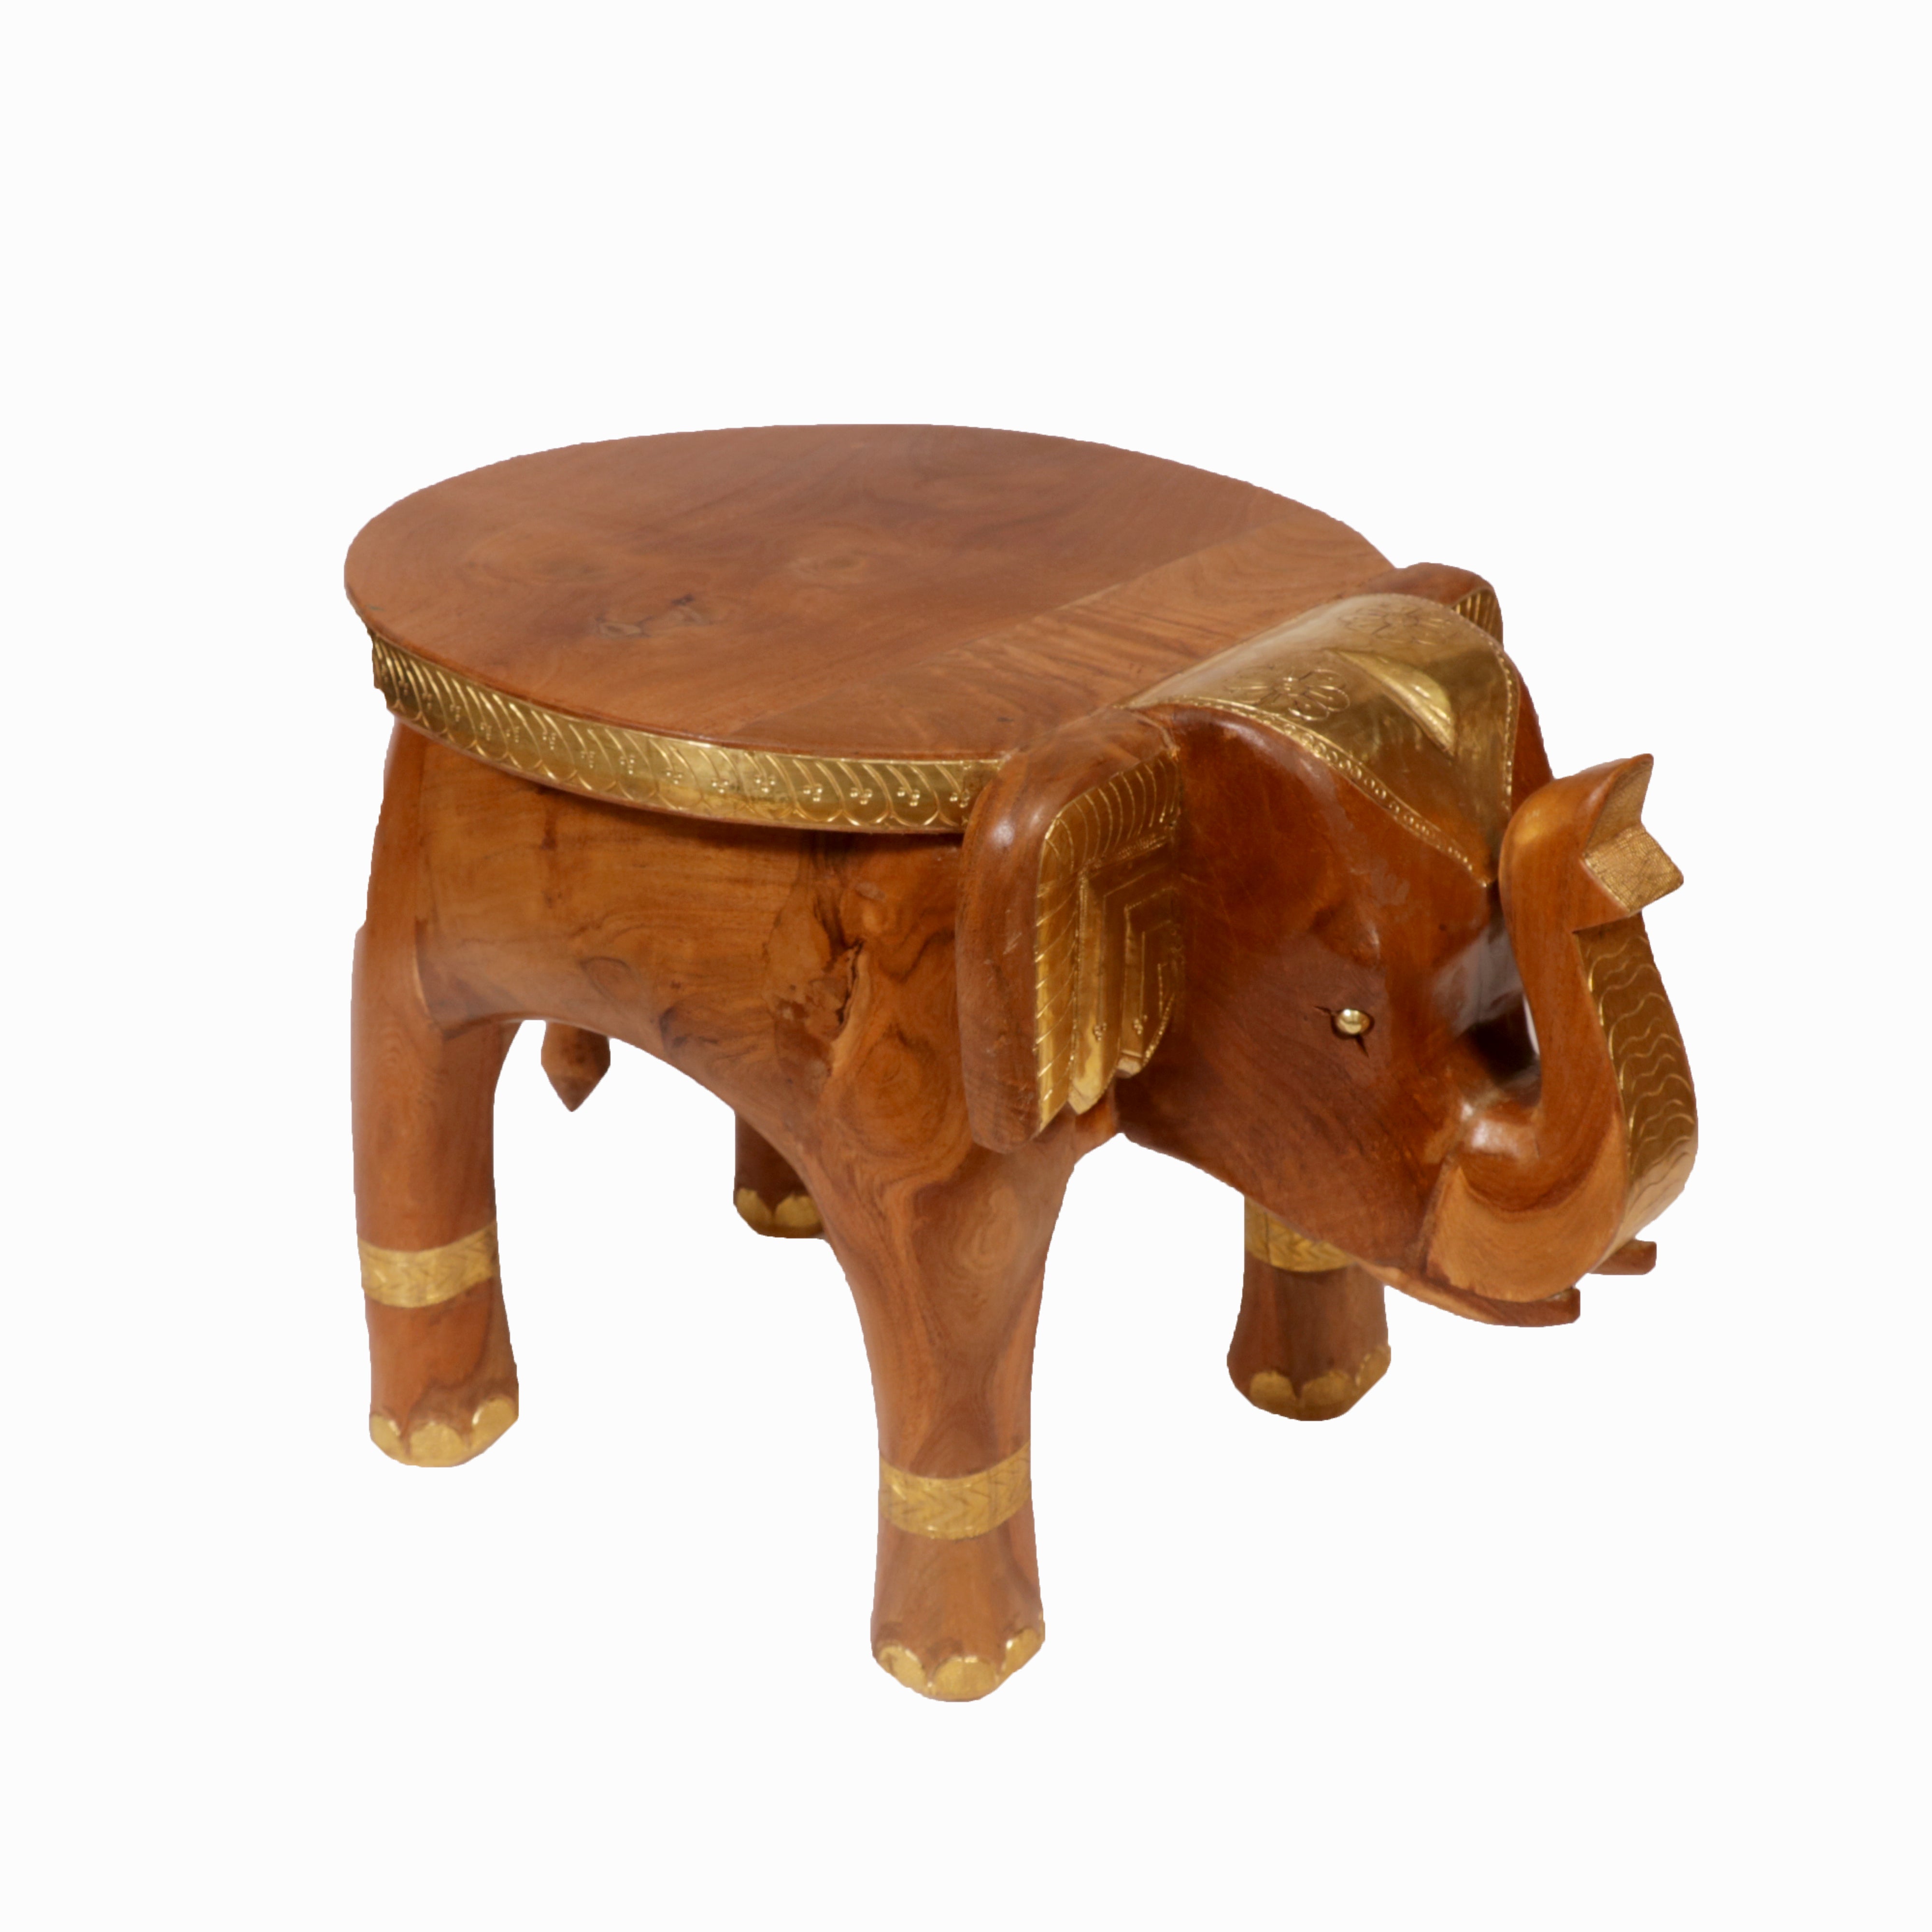 Royal Majestic Brass fitted Wooden Elephant Animal Figurine